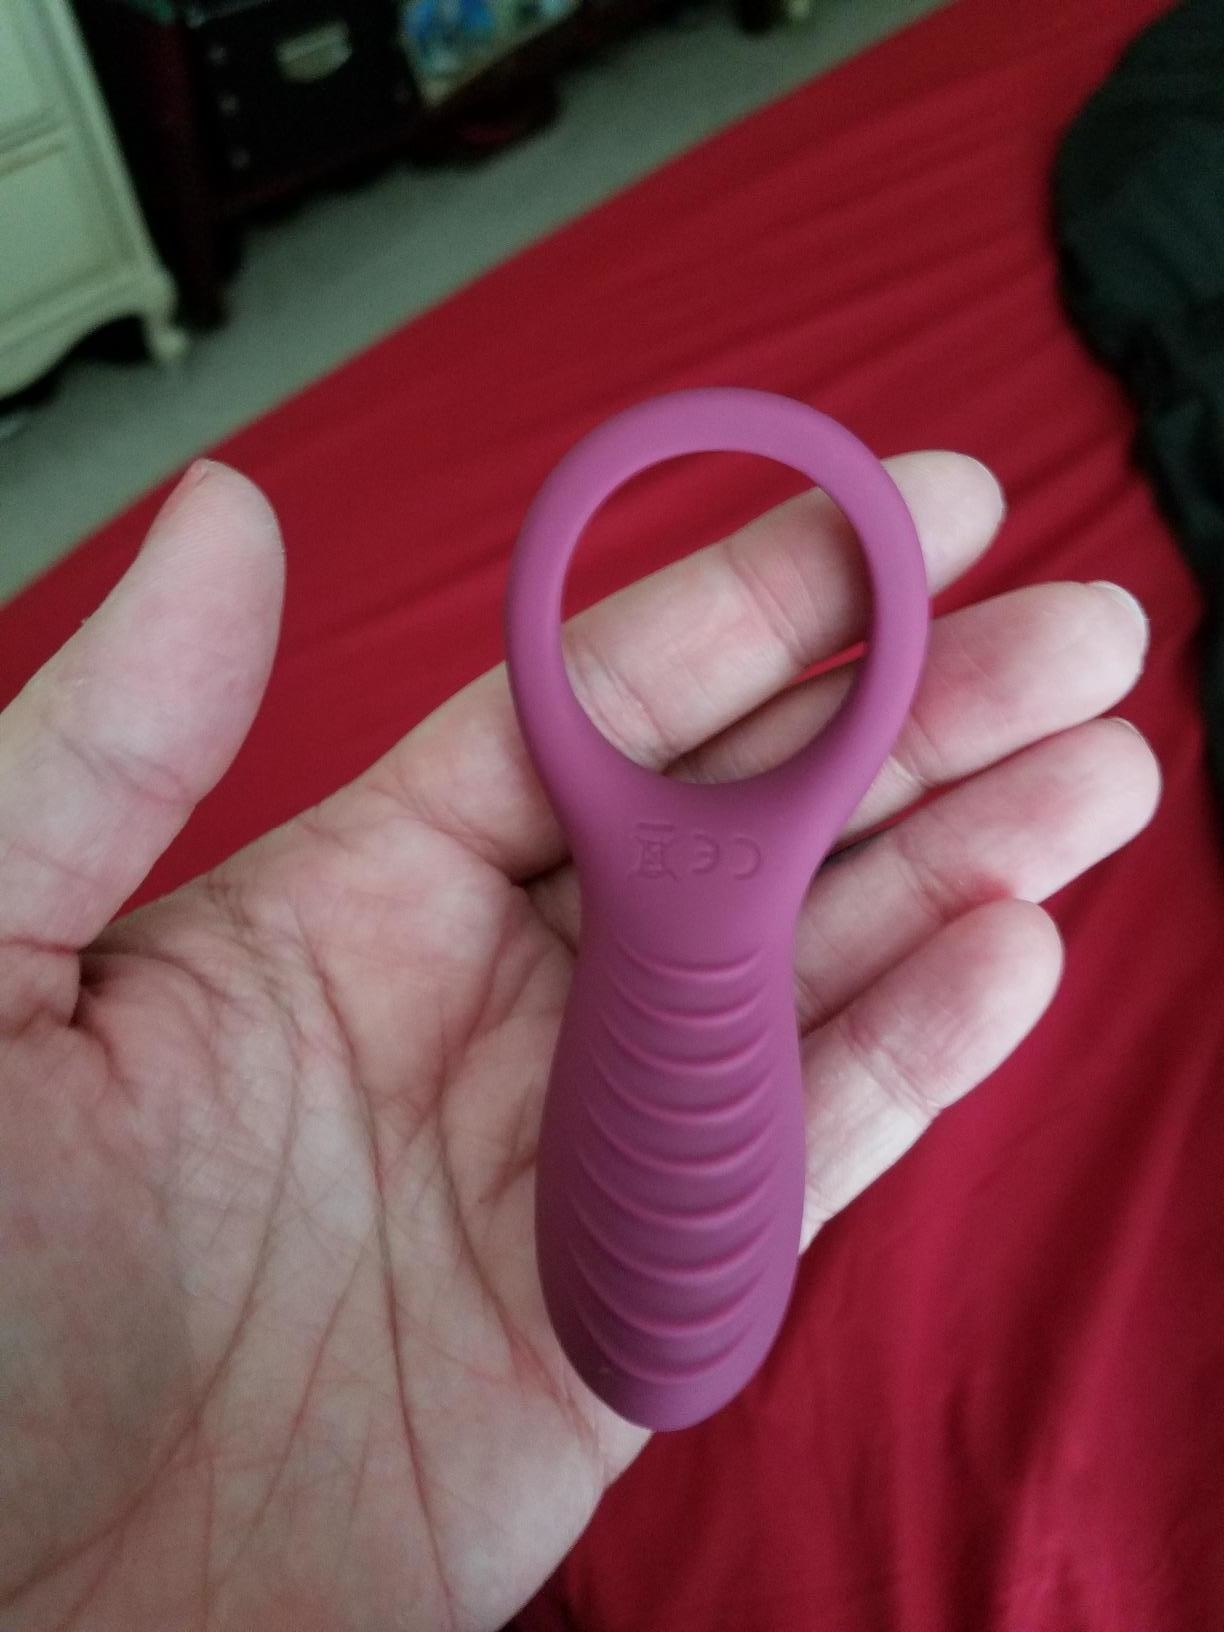 Vibrating cock ring plus sleeve equals